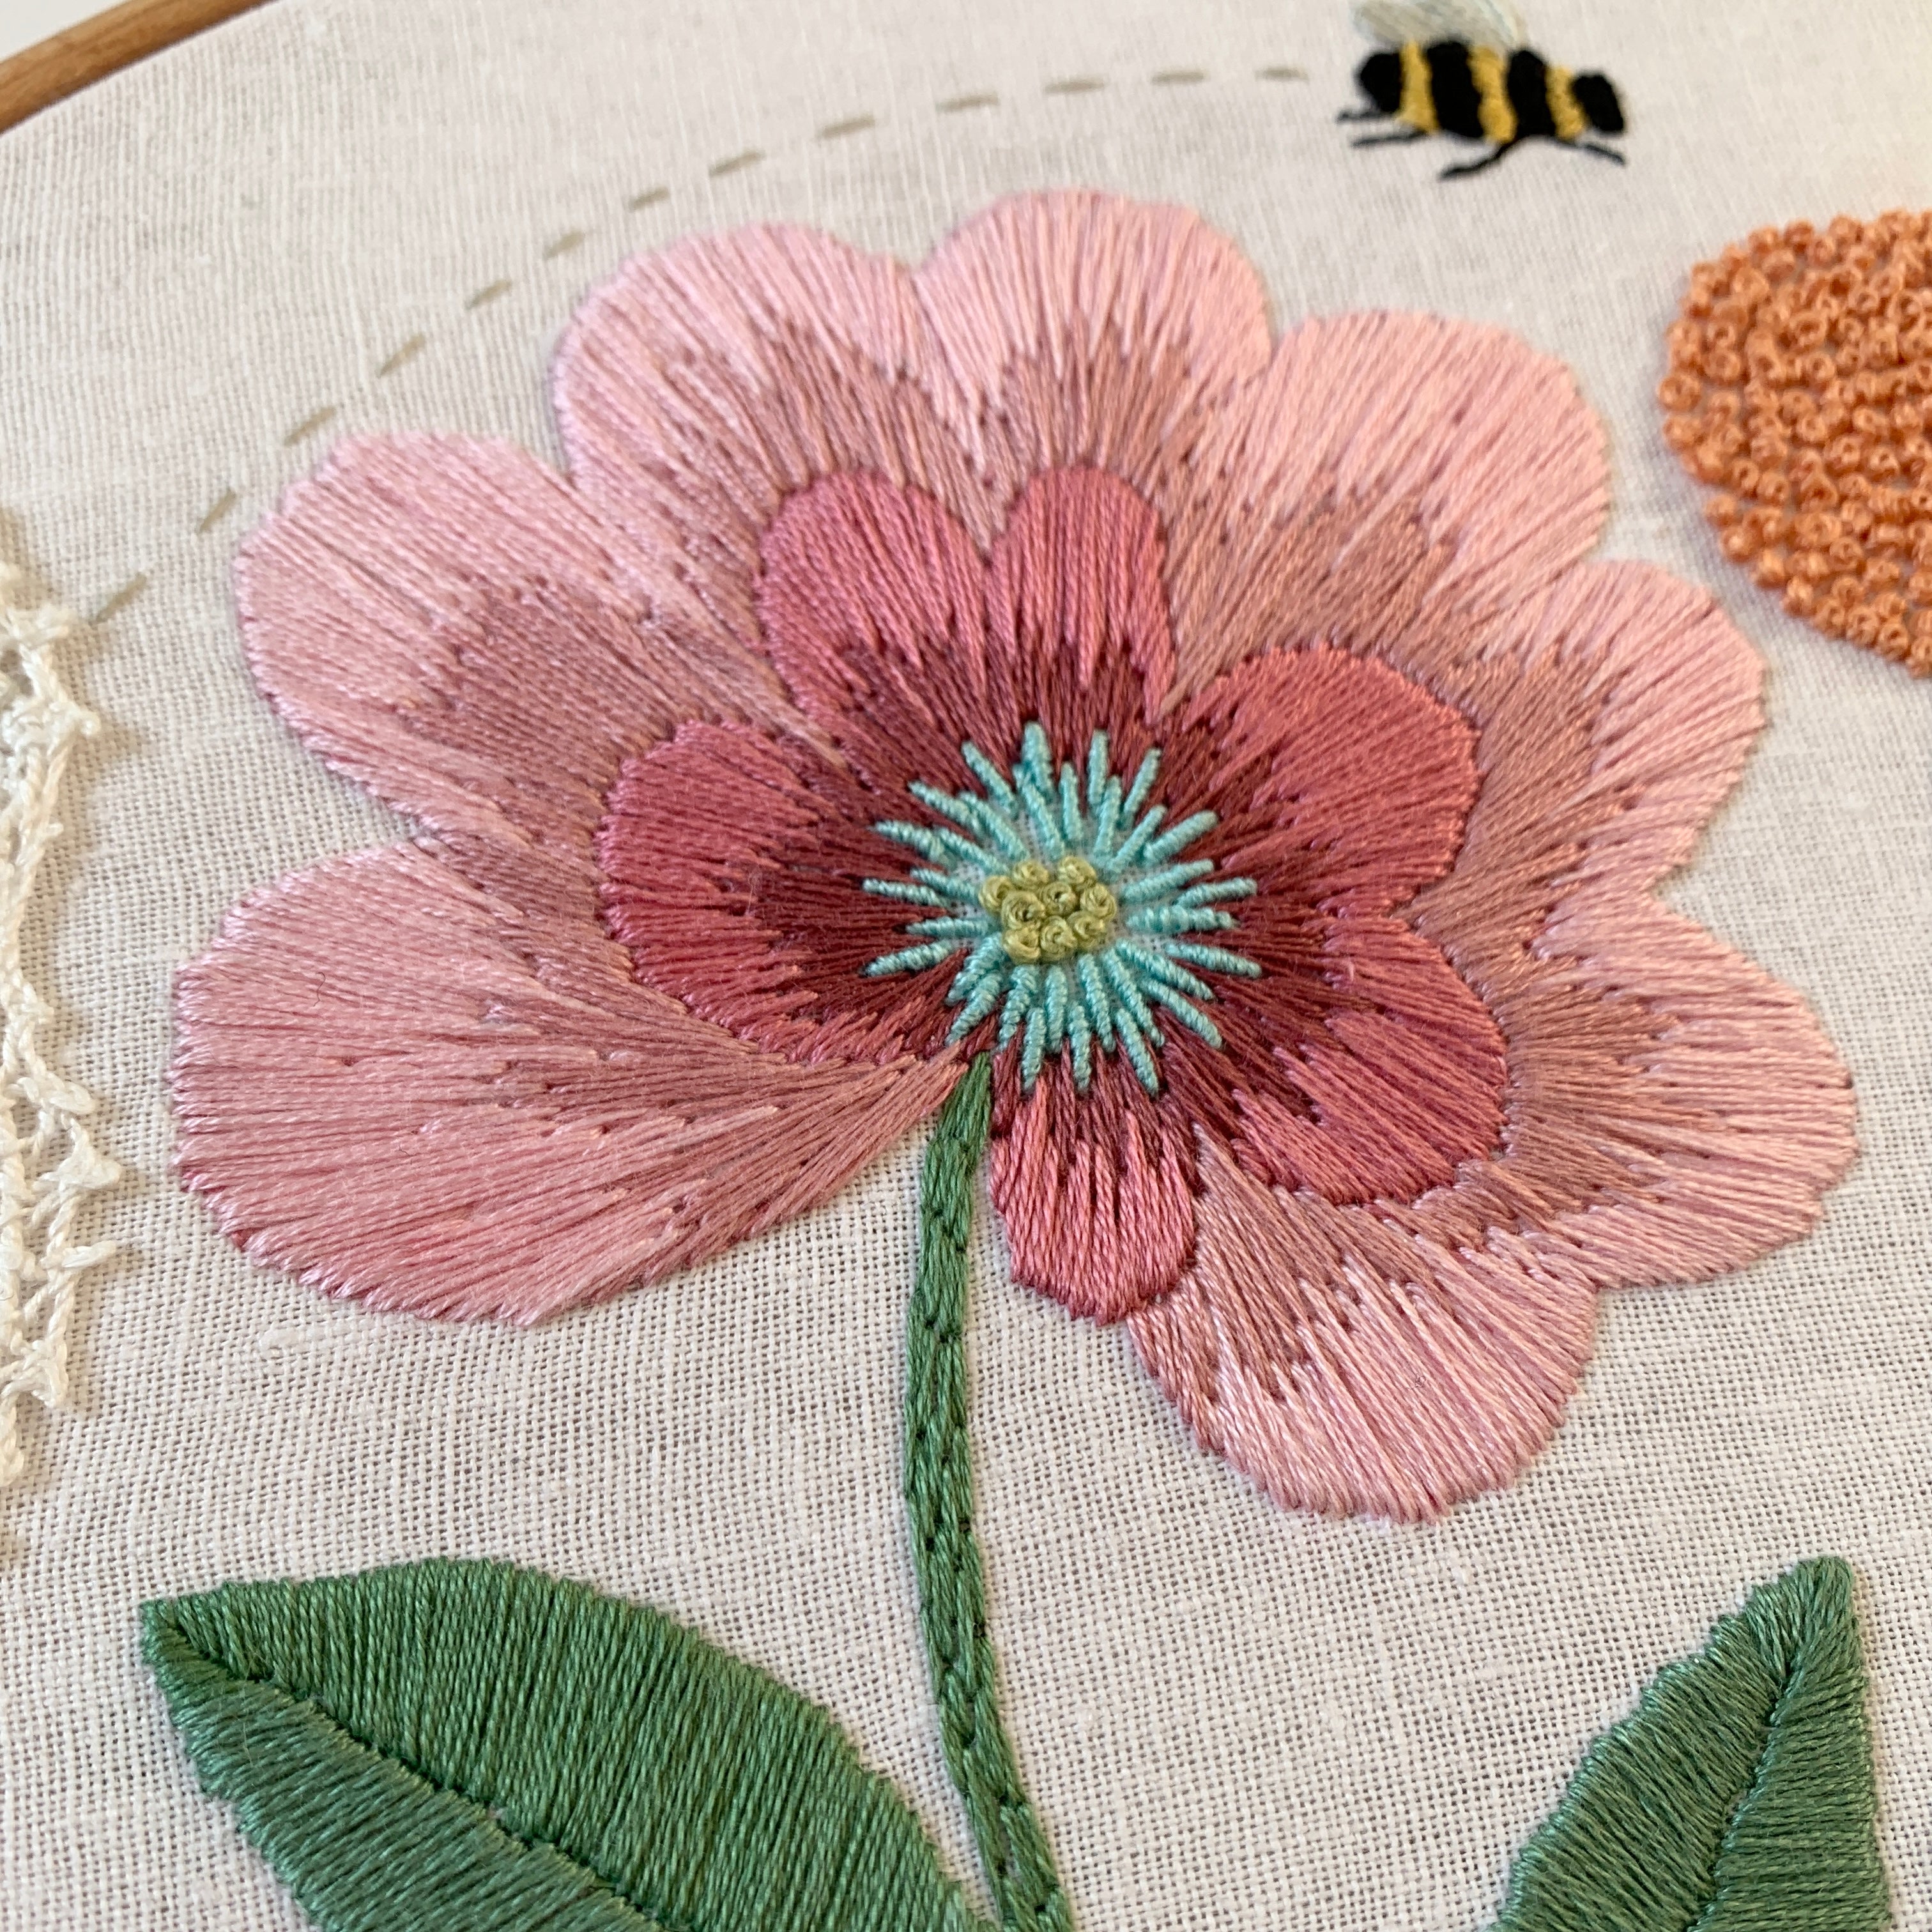 Original florals and insects embroidery hoop.